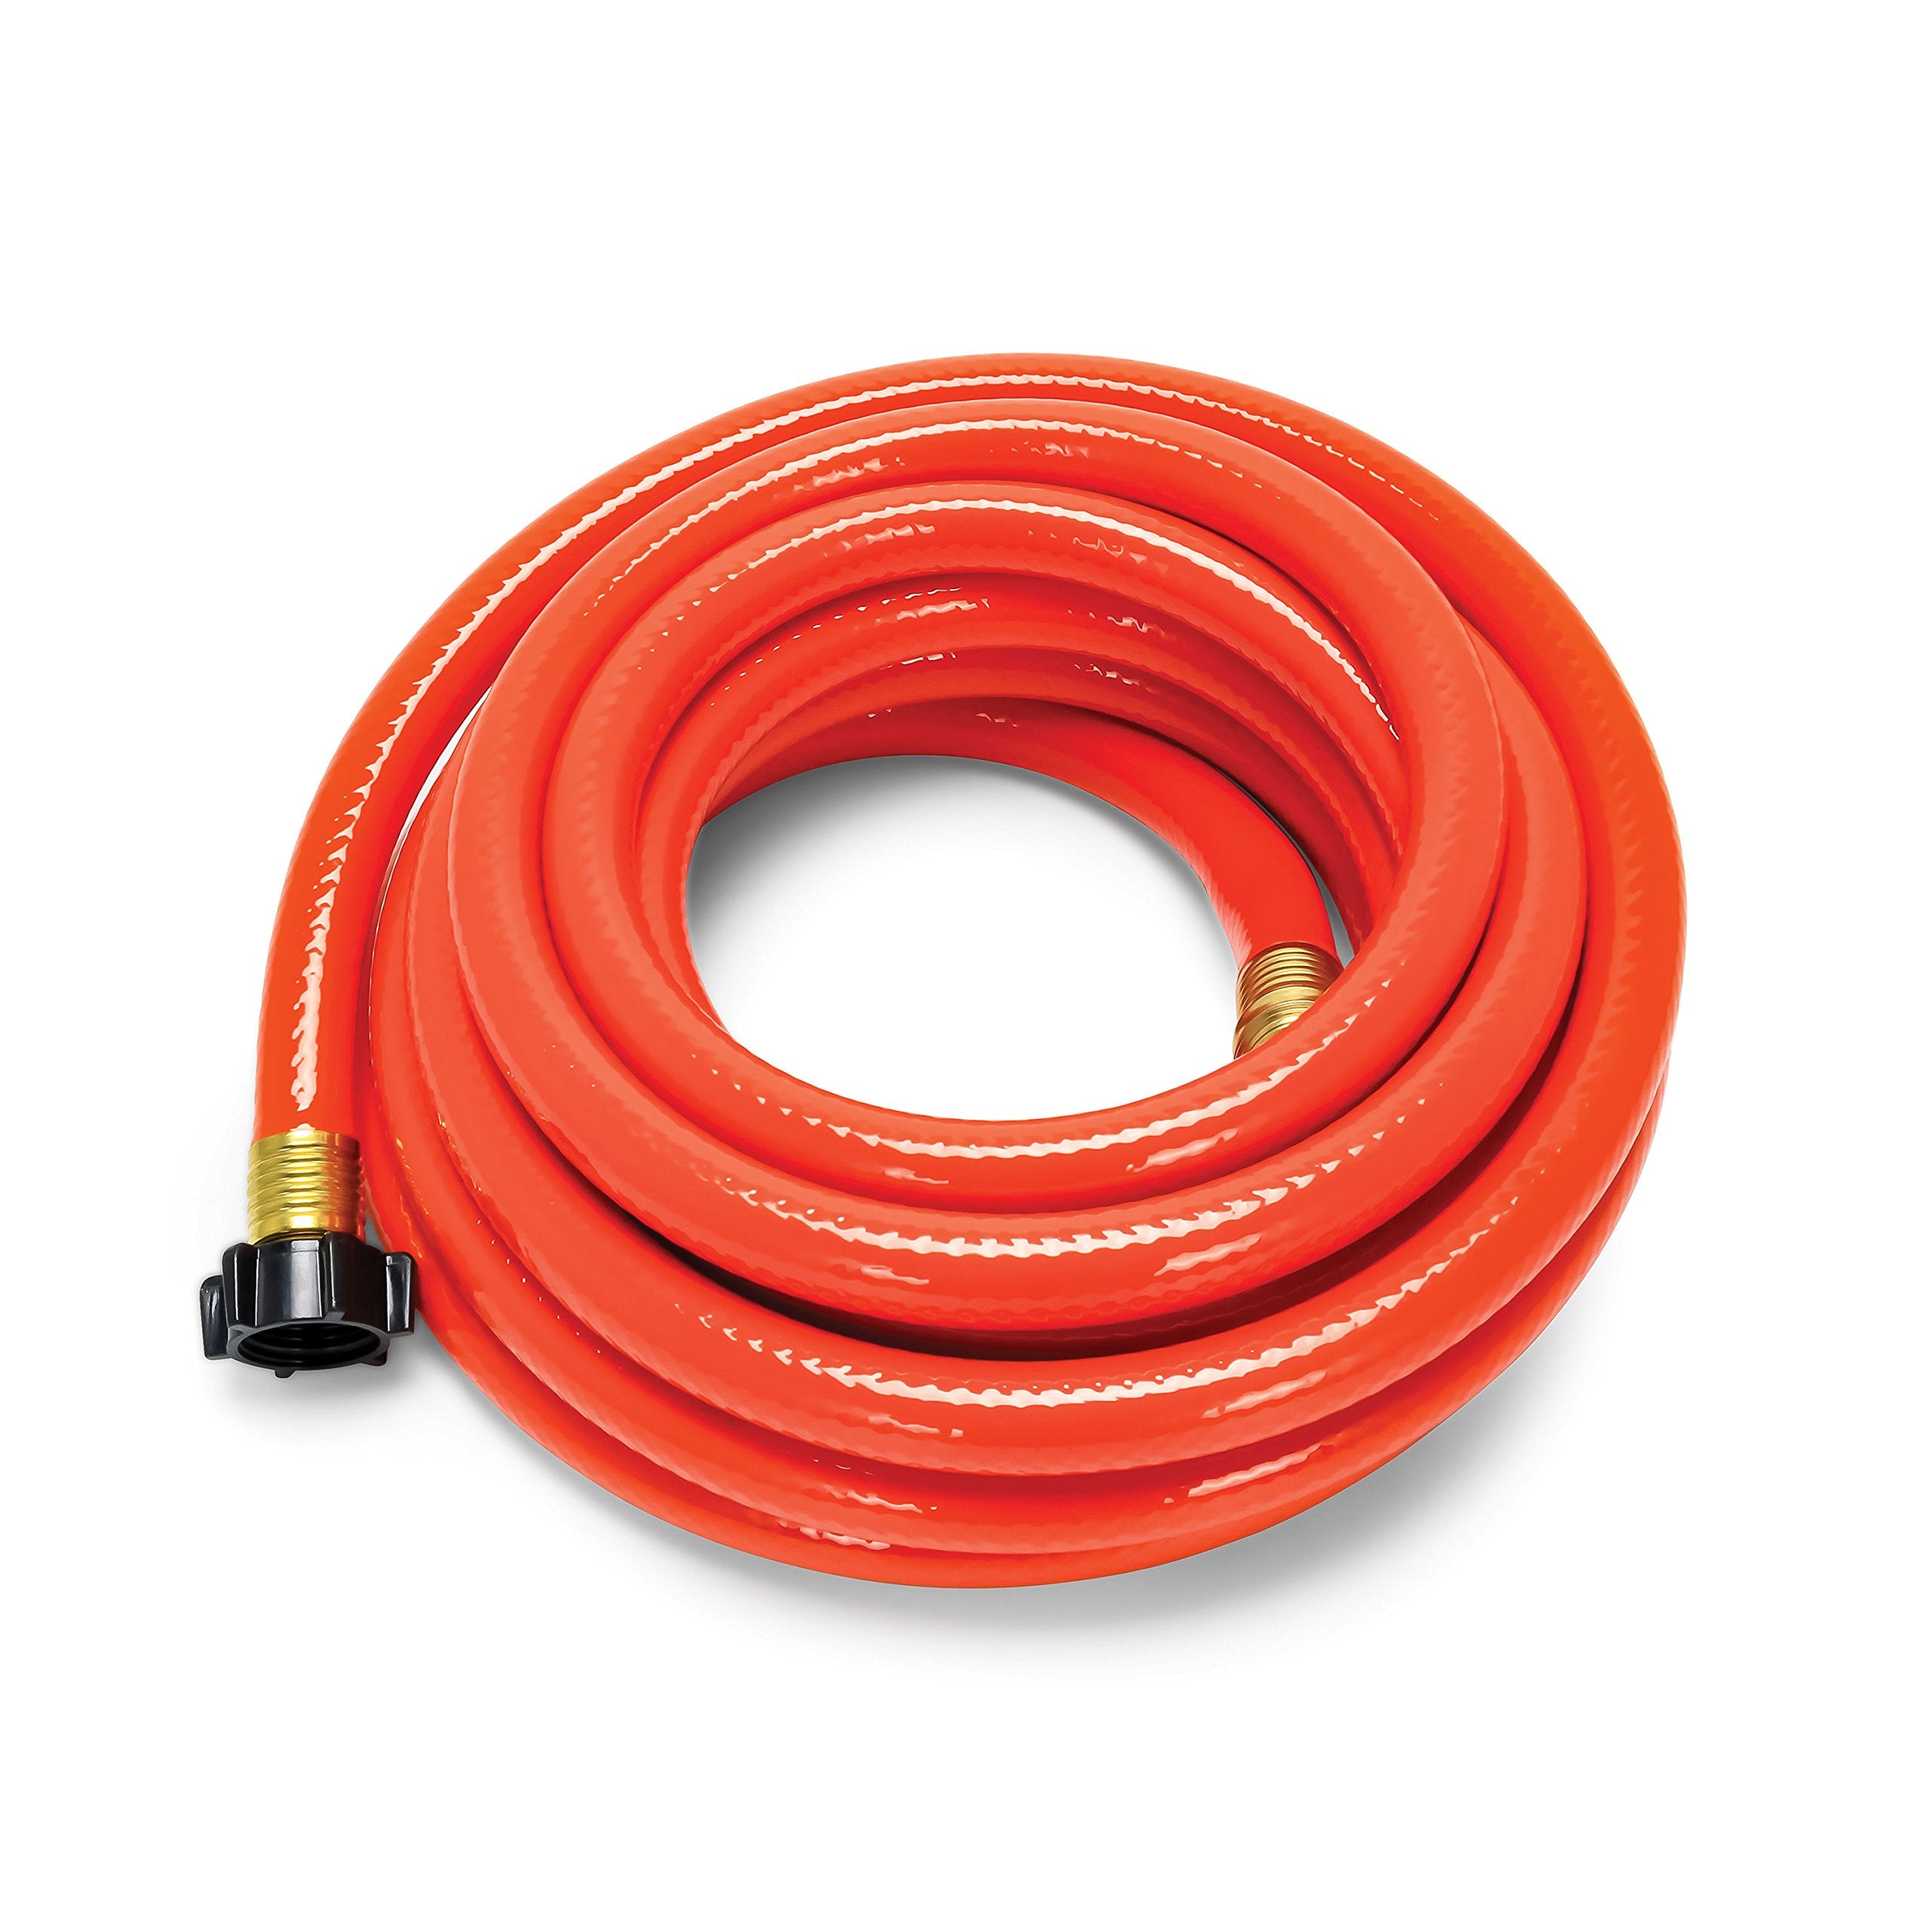 Camco 22990 RhinoFLEX 25', Clean Out Gray/Black Water Hose, 5/8" ID